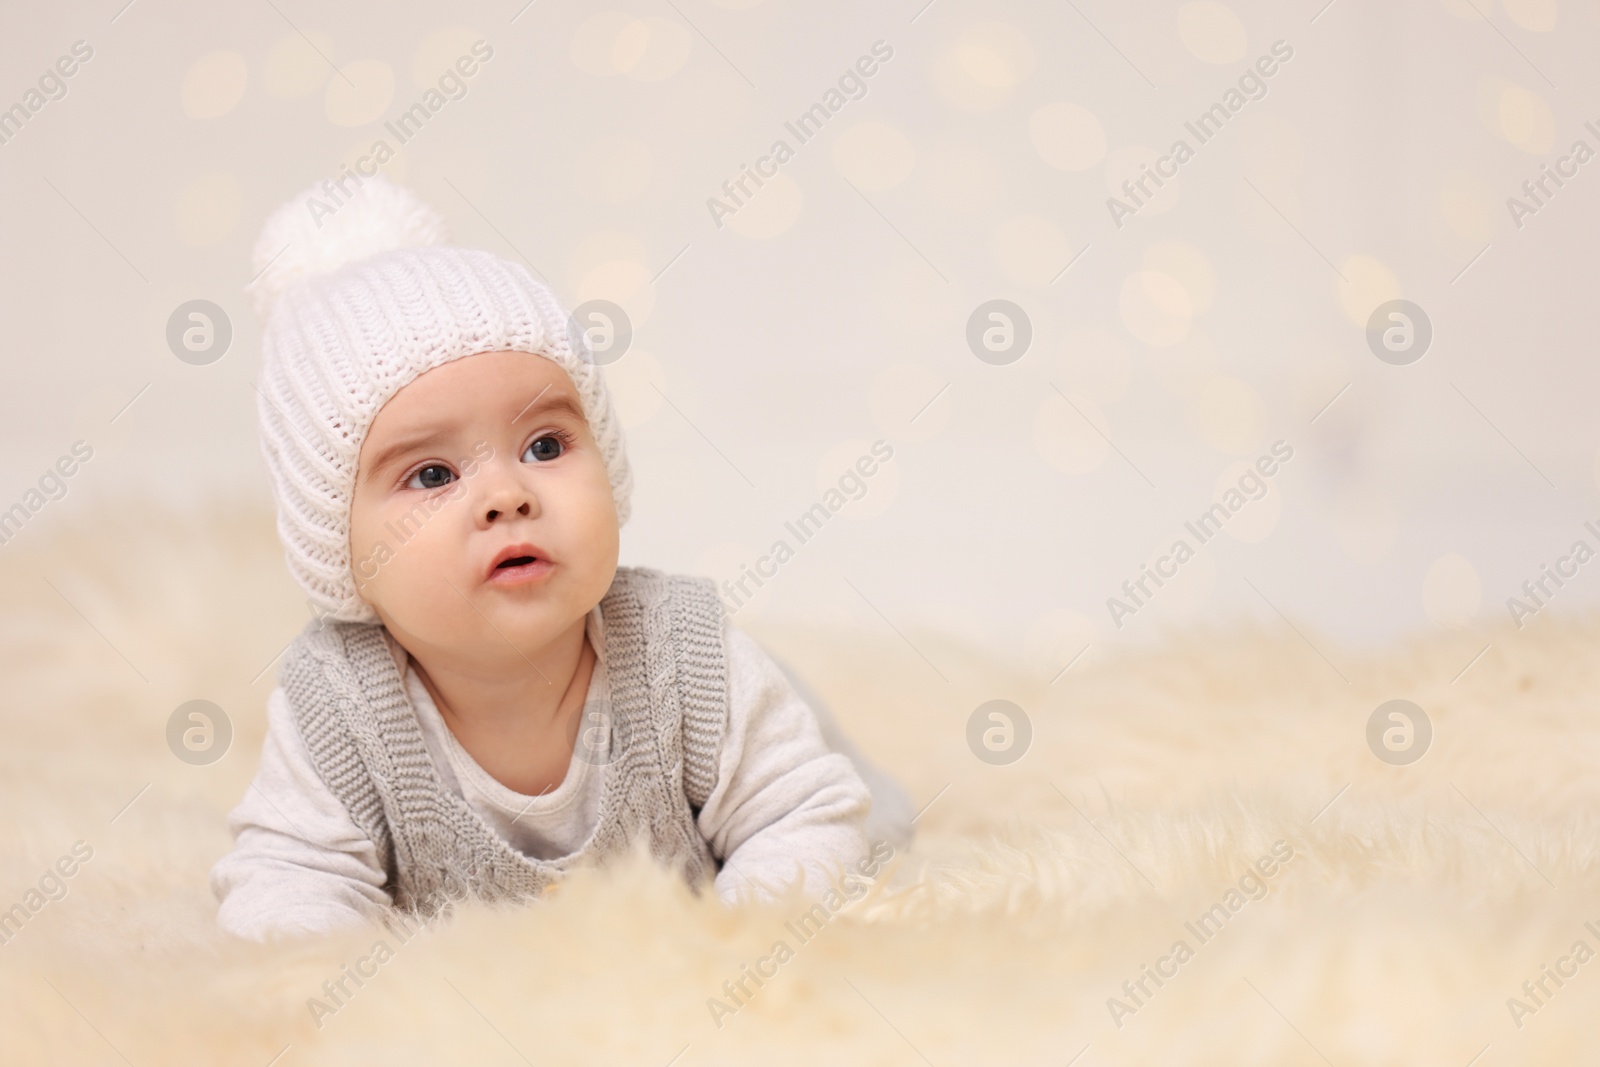 Photo of Cute baby on fluffy carpet against blurred festive lights, space for text. Winter holiday